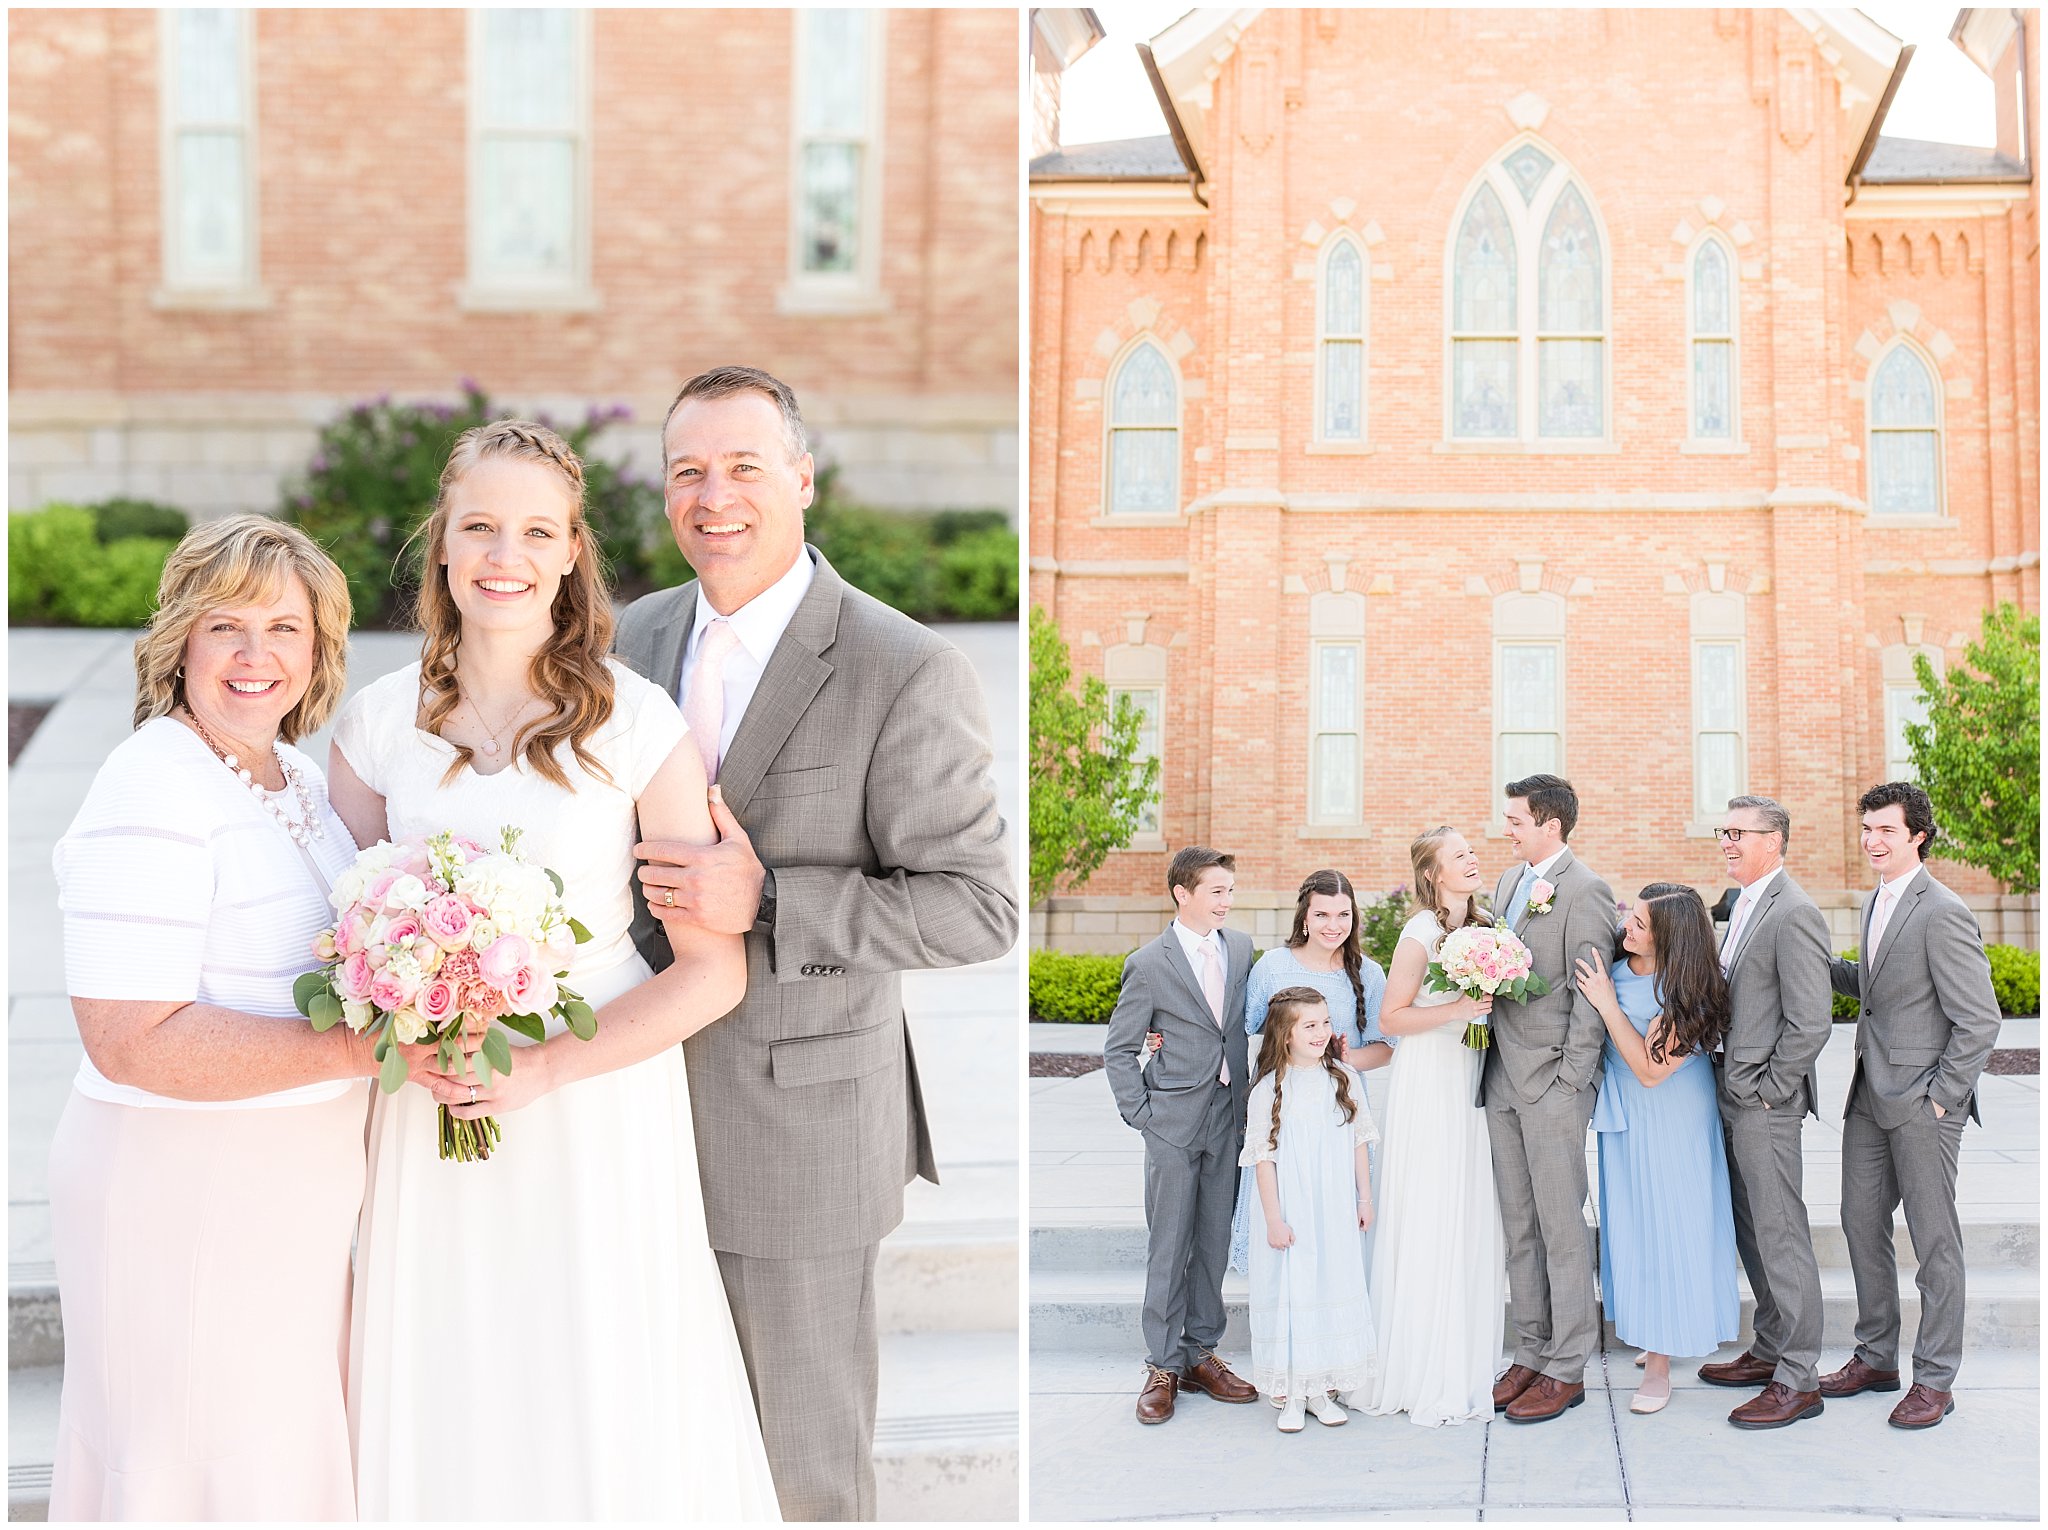 Bride and Groom with family during portraits | Spring Provo City Center Temple Wedding | Jessie and Dallin Photography